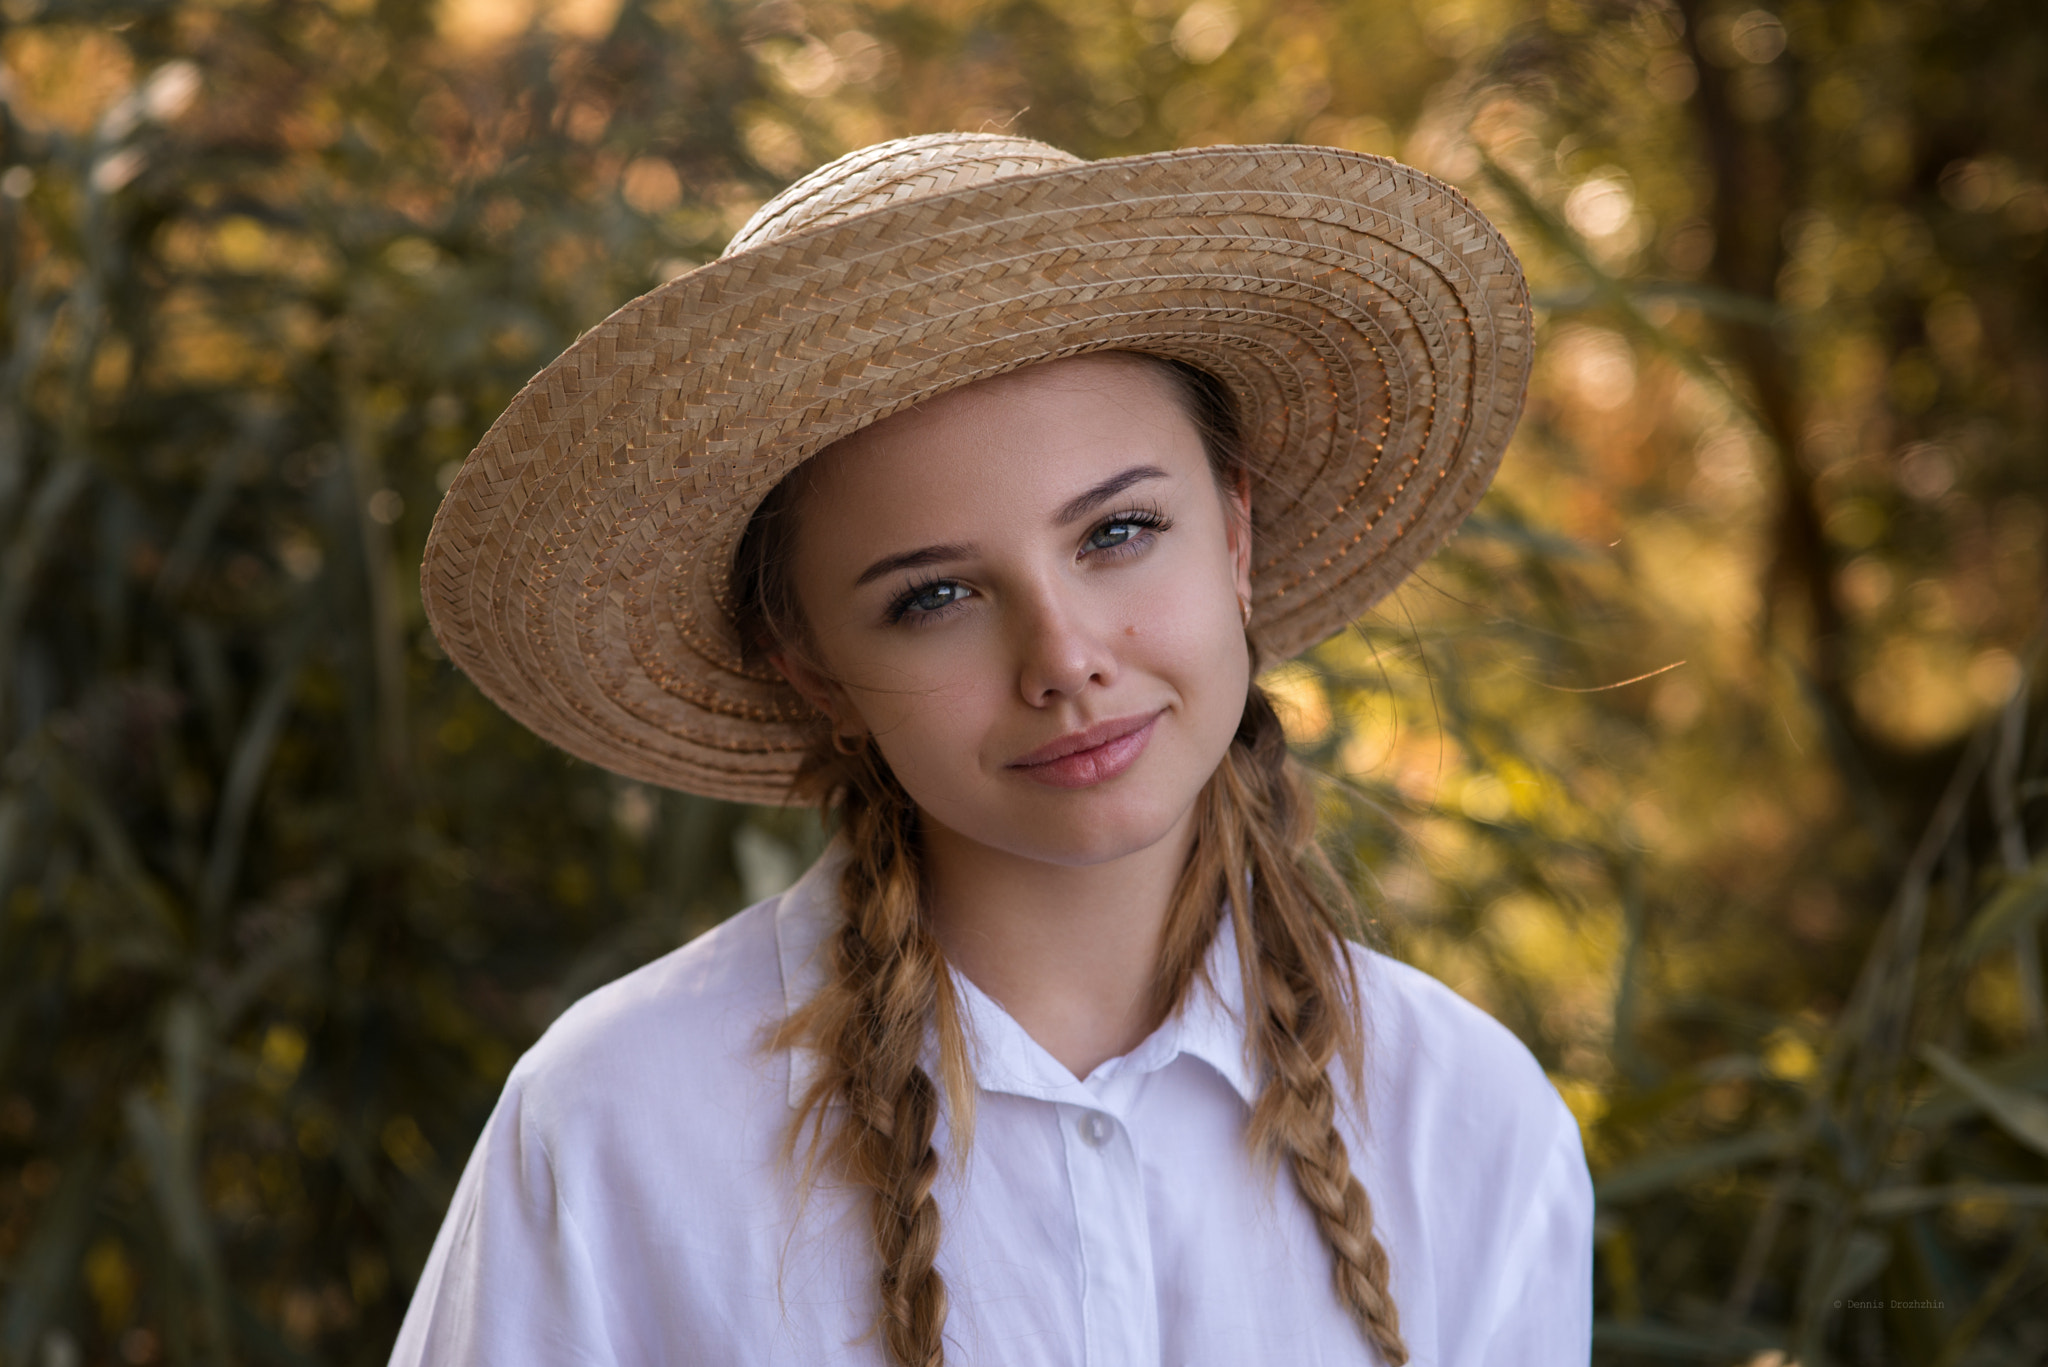 Women Pigtails Smiling Blonde Hat White Shirt Gray Eyes Portrait Straw Hat Women With Hats Dennis Dr 2048x1367